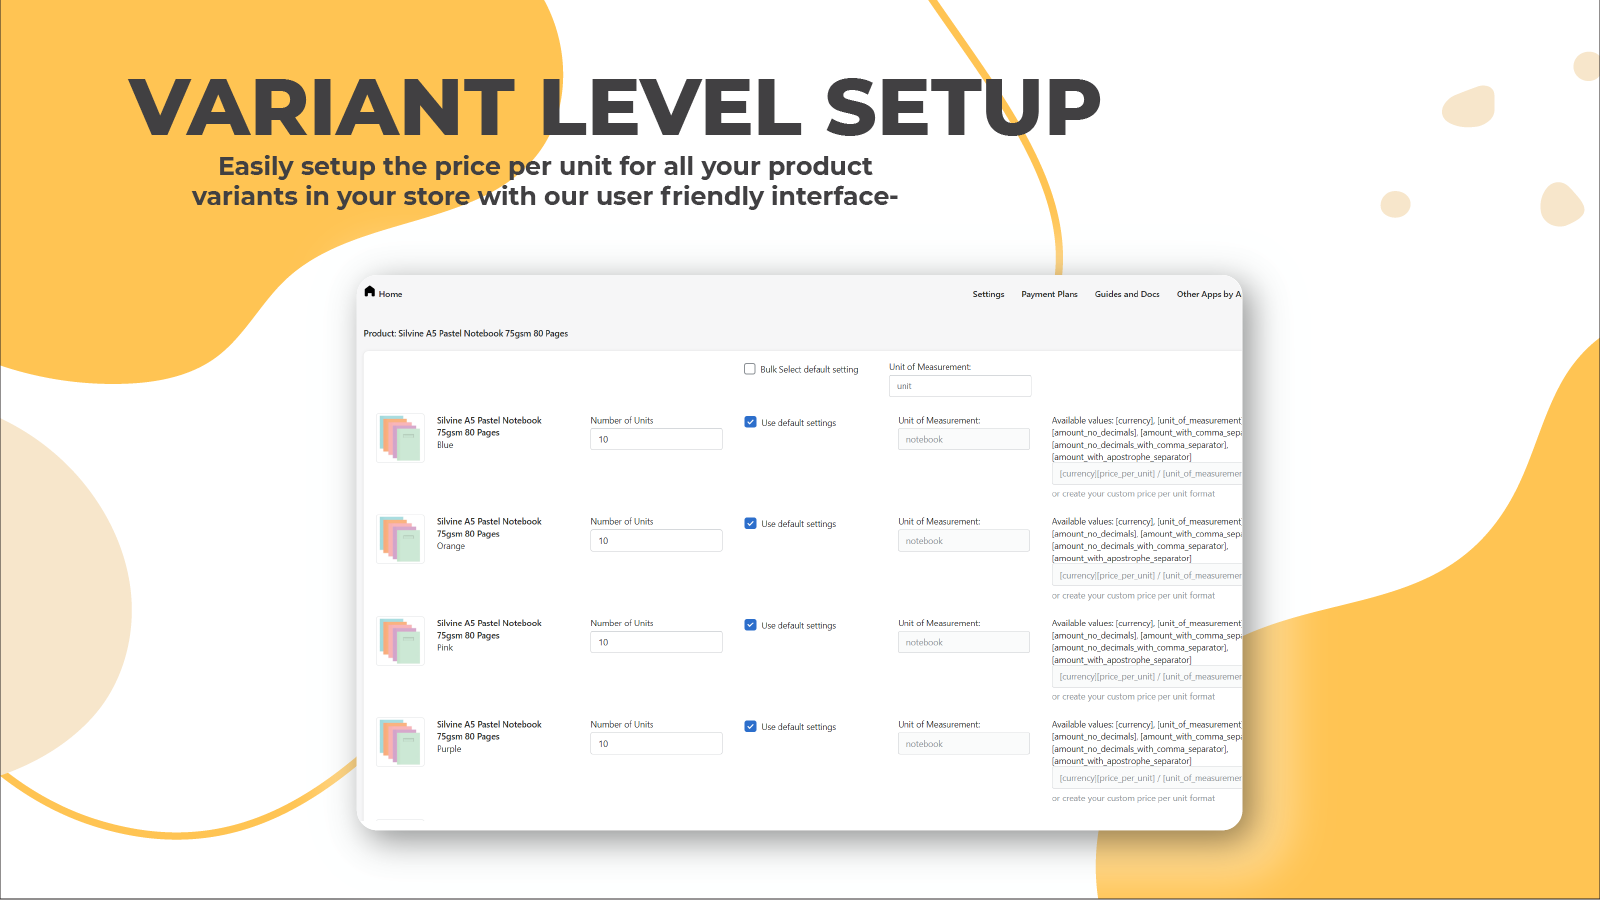 Easily setup the price per unit for all your product variants.